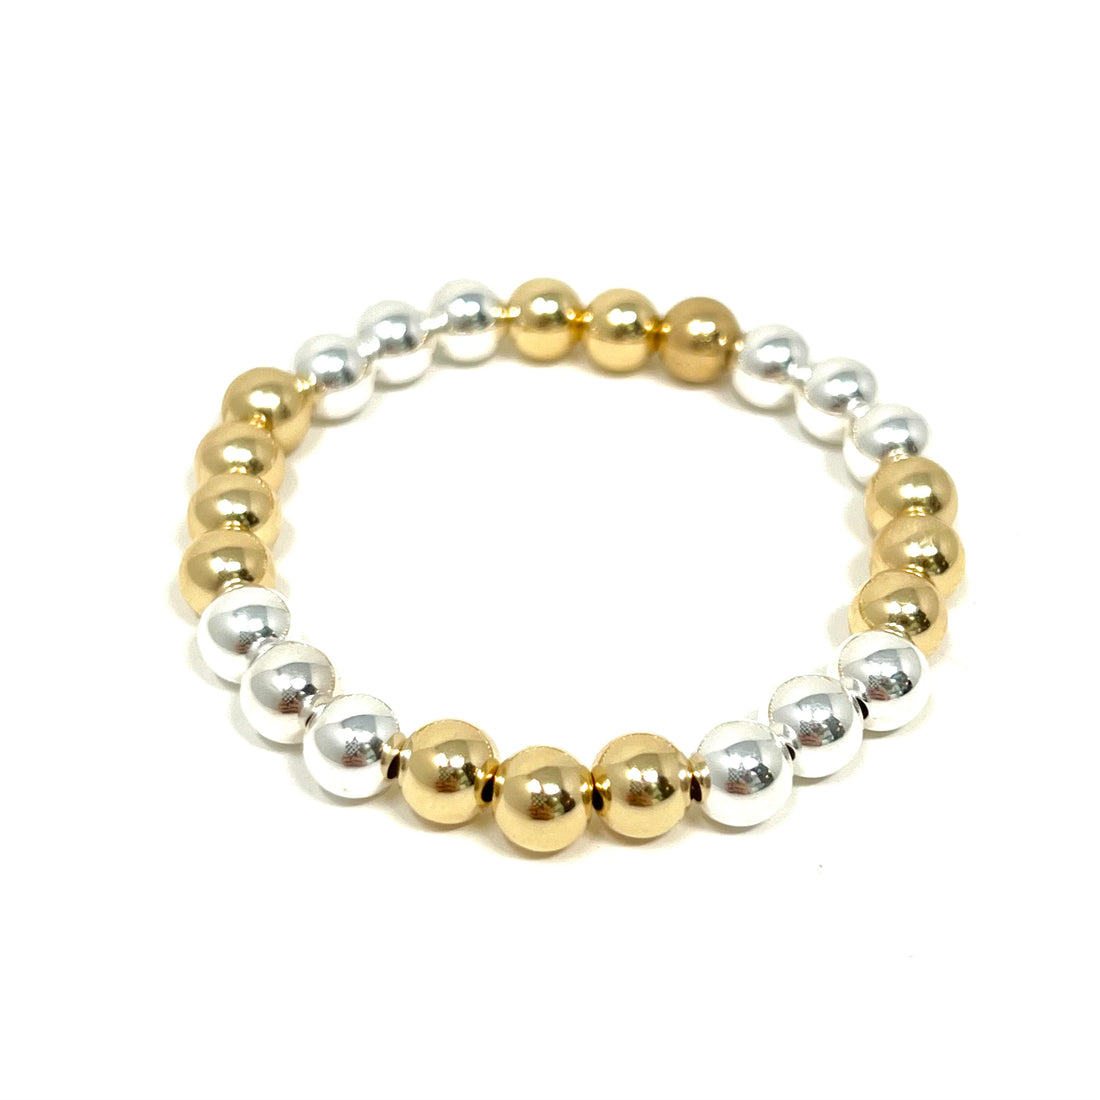 Large Ball Bracelet in Blocks of Silver and Gold